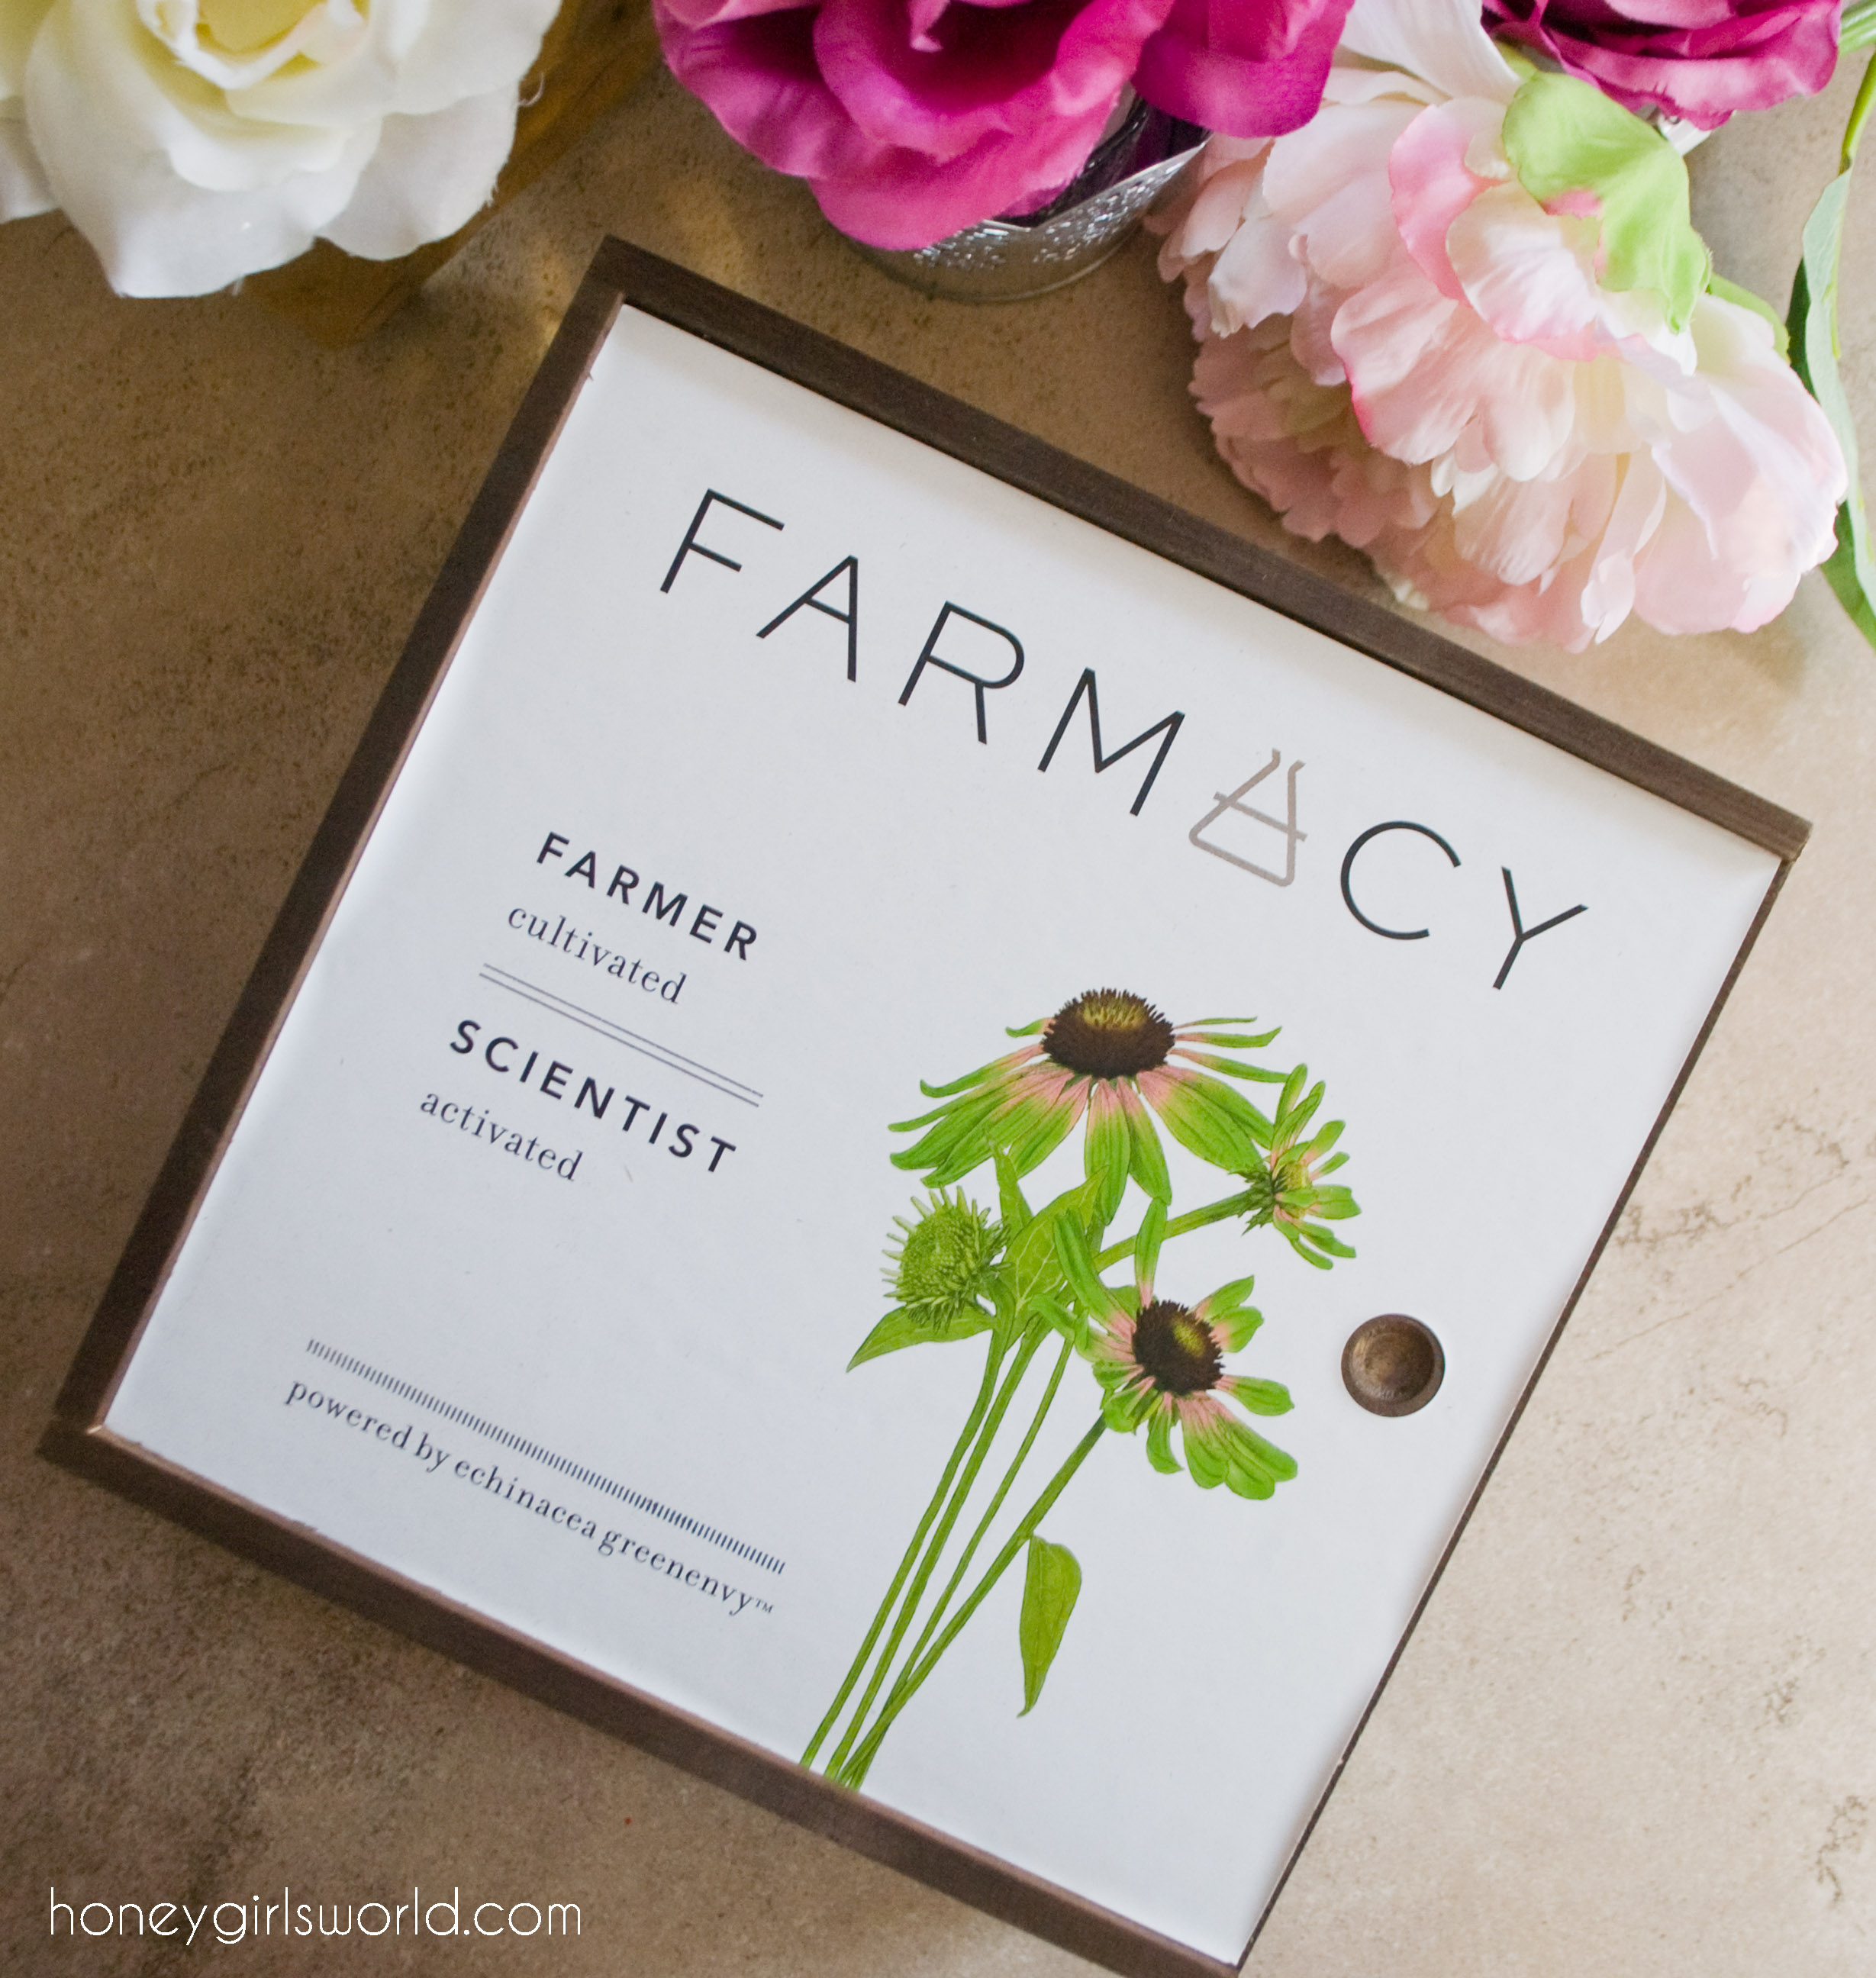 Farmacy Beauty: Farmer Cultivated, Scientist Activated For Fresh Radiant Skin